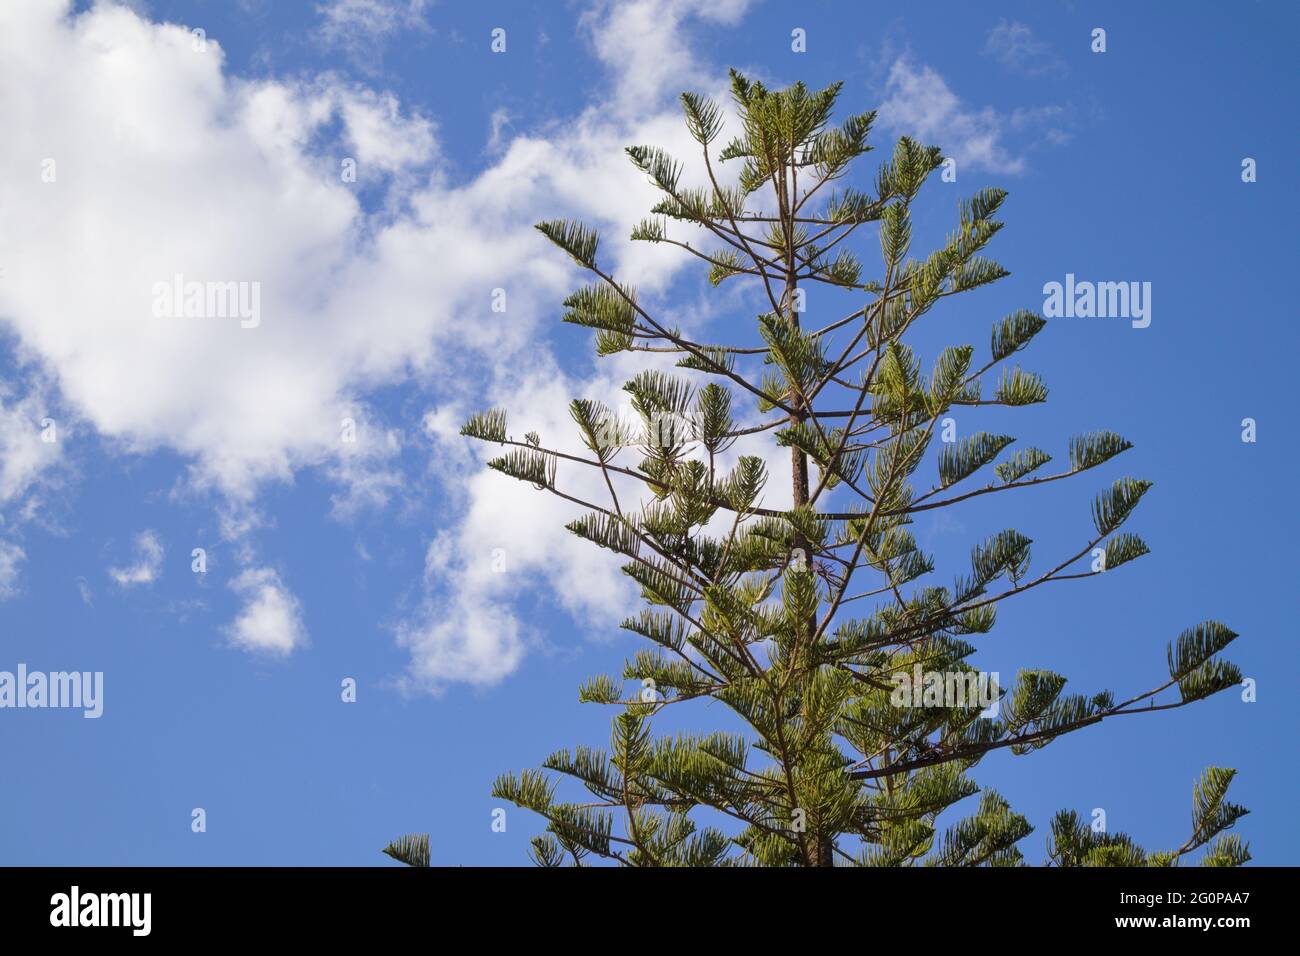 Image of a tall tree of the coniferous family, a Araucaria excelsa with the blue sky with clouds in the background Stock Photo